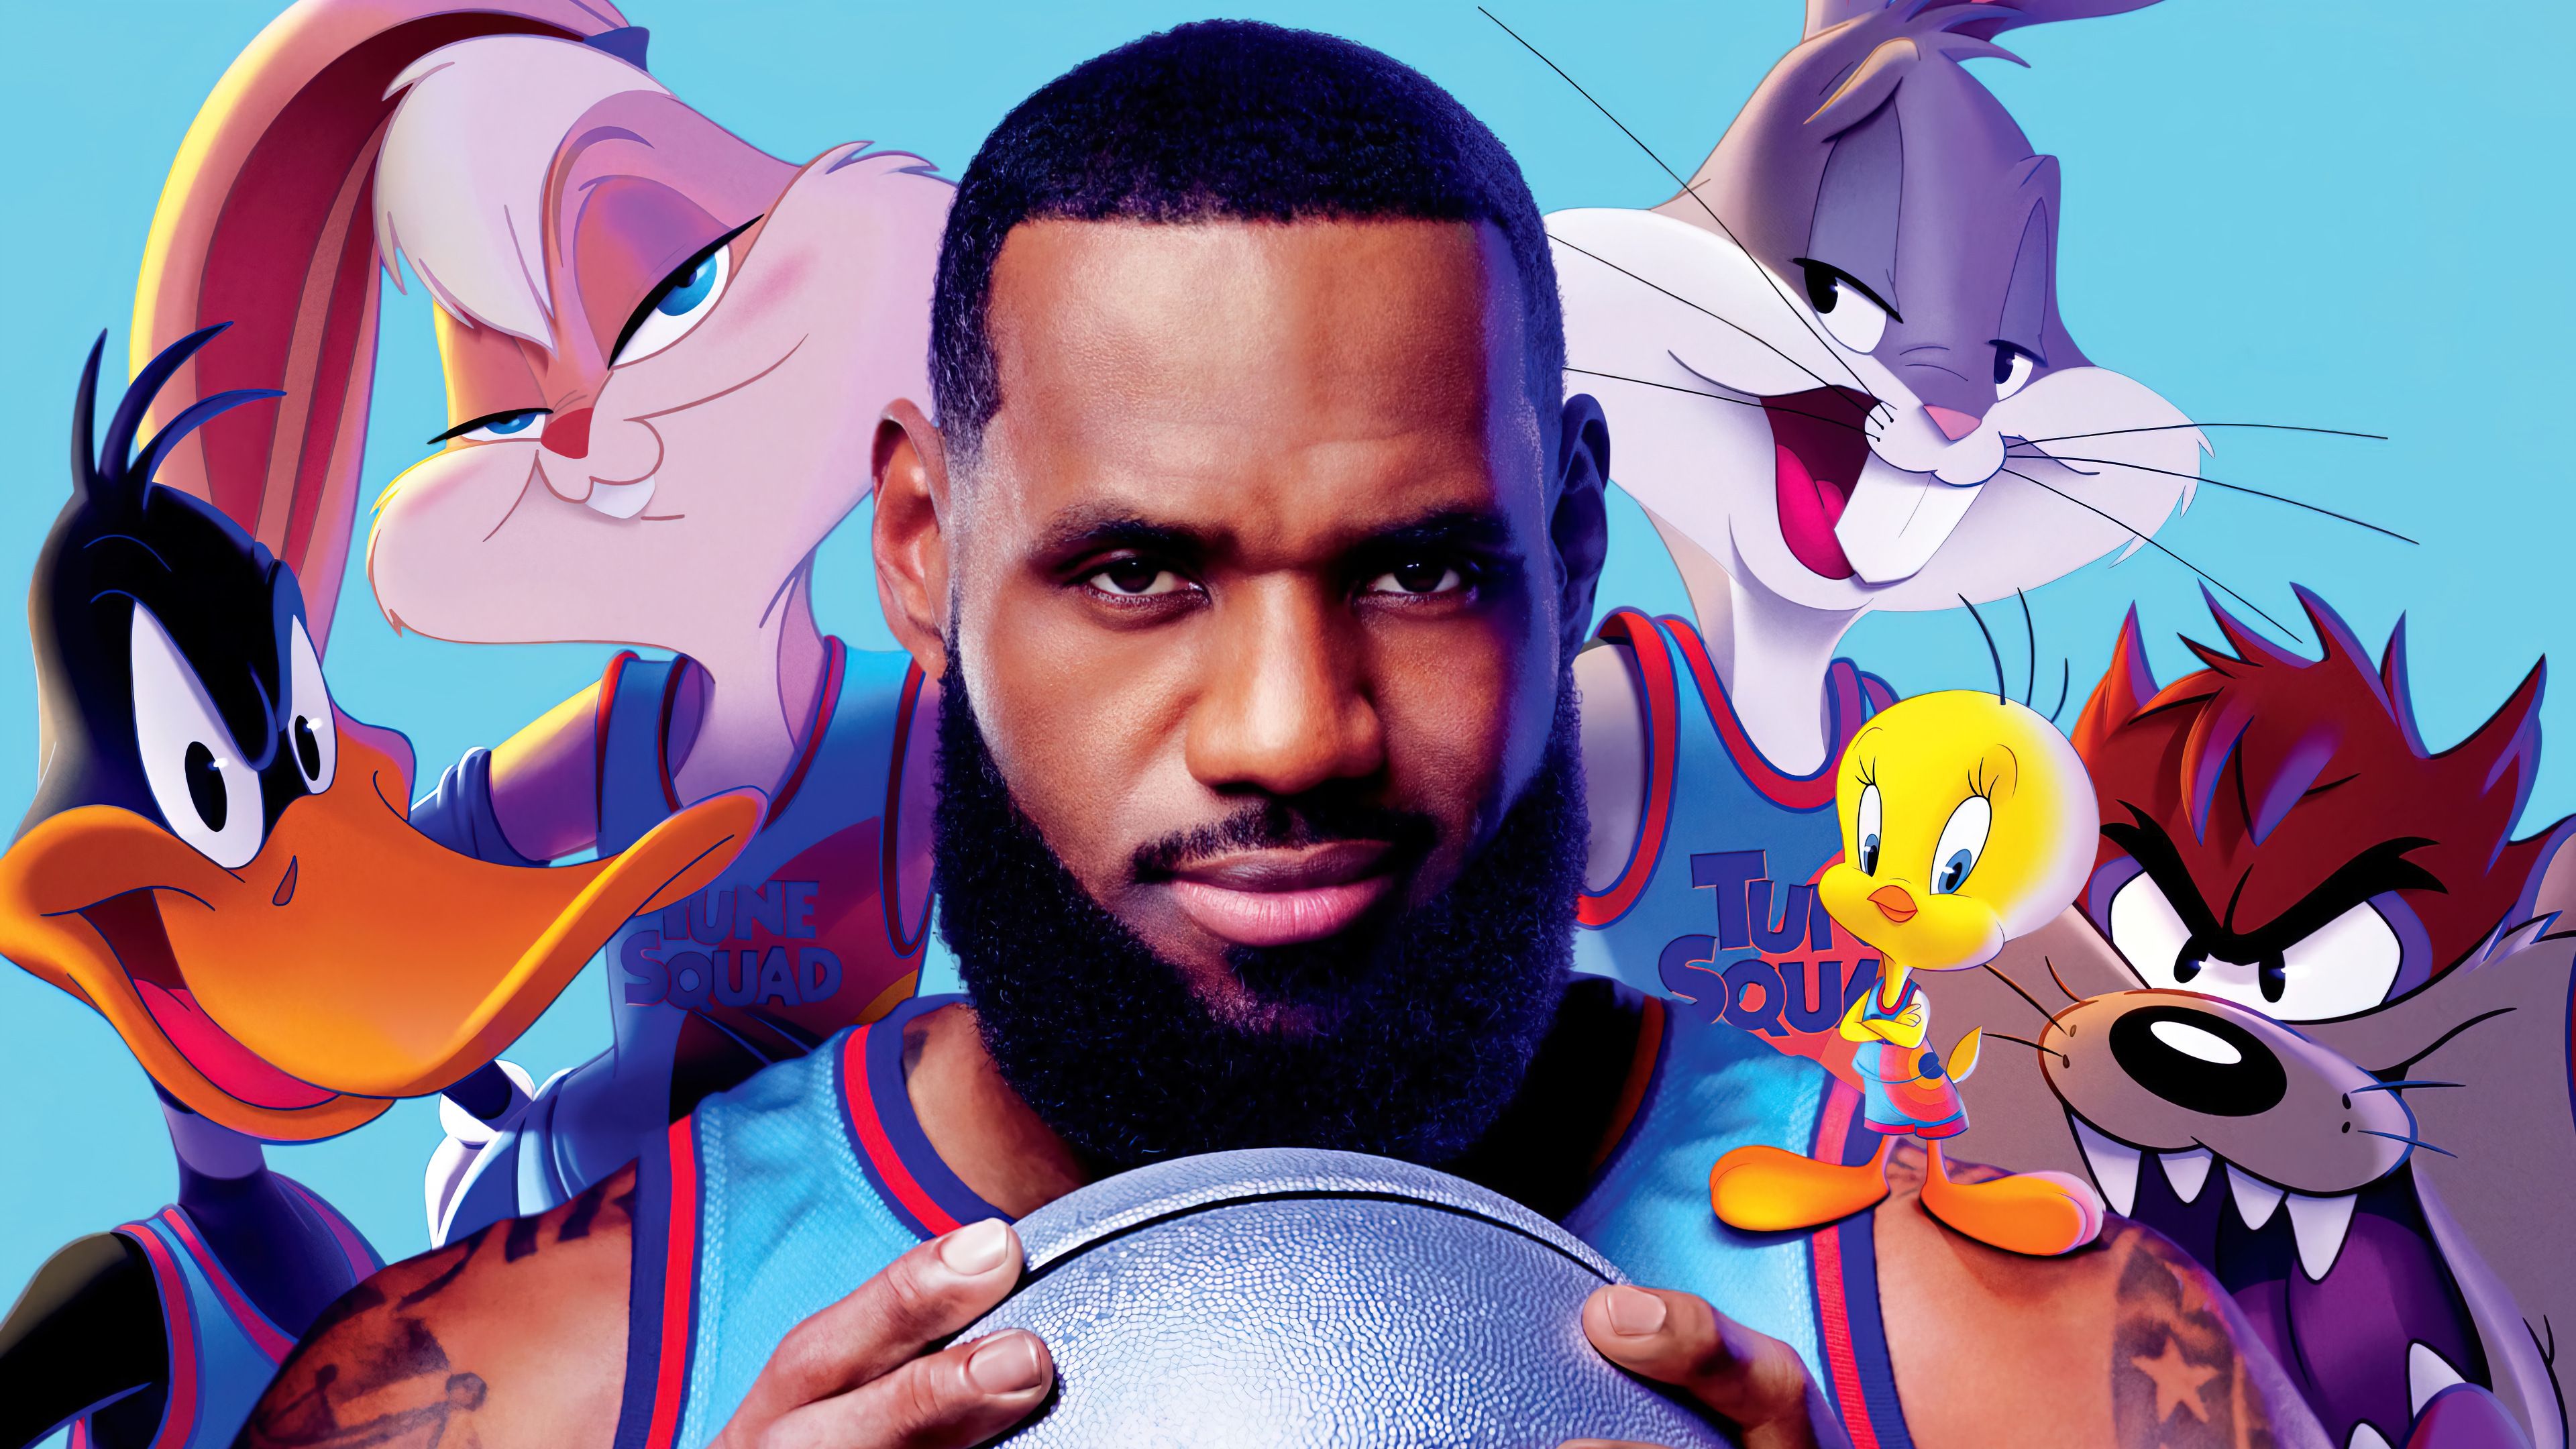 Space Jam A New Legacy 2021 Wallpapers - Wallpaper Cave